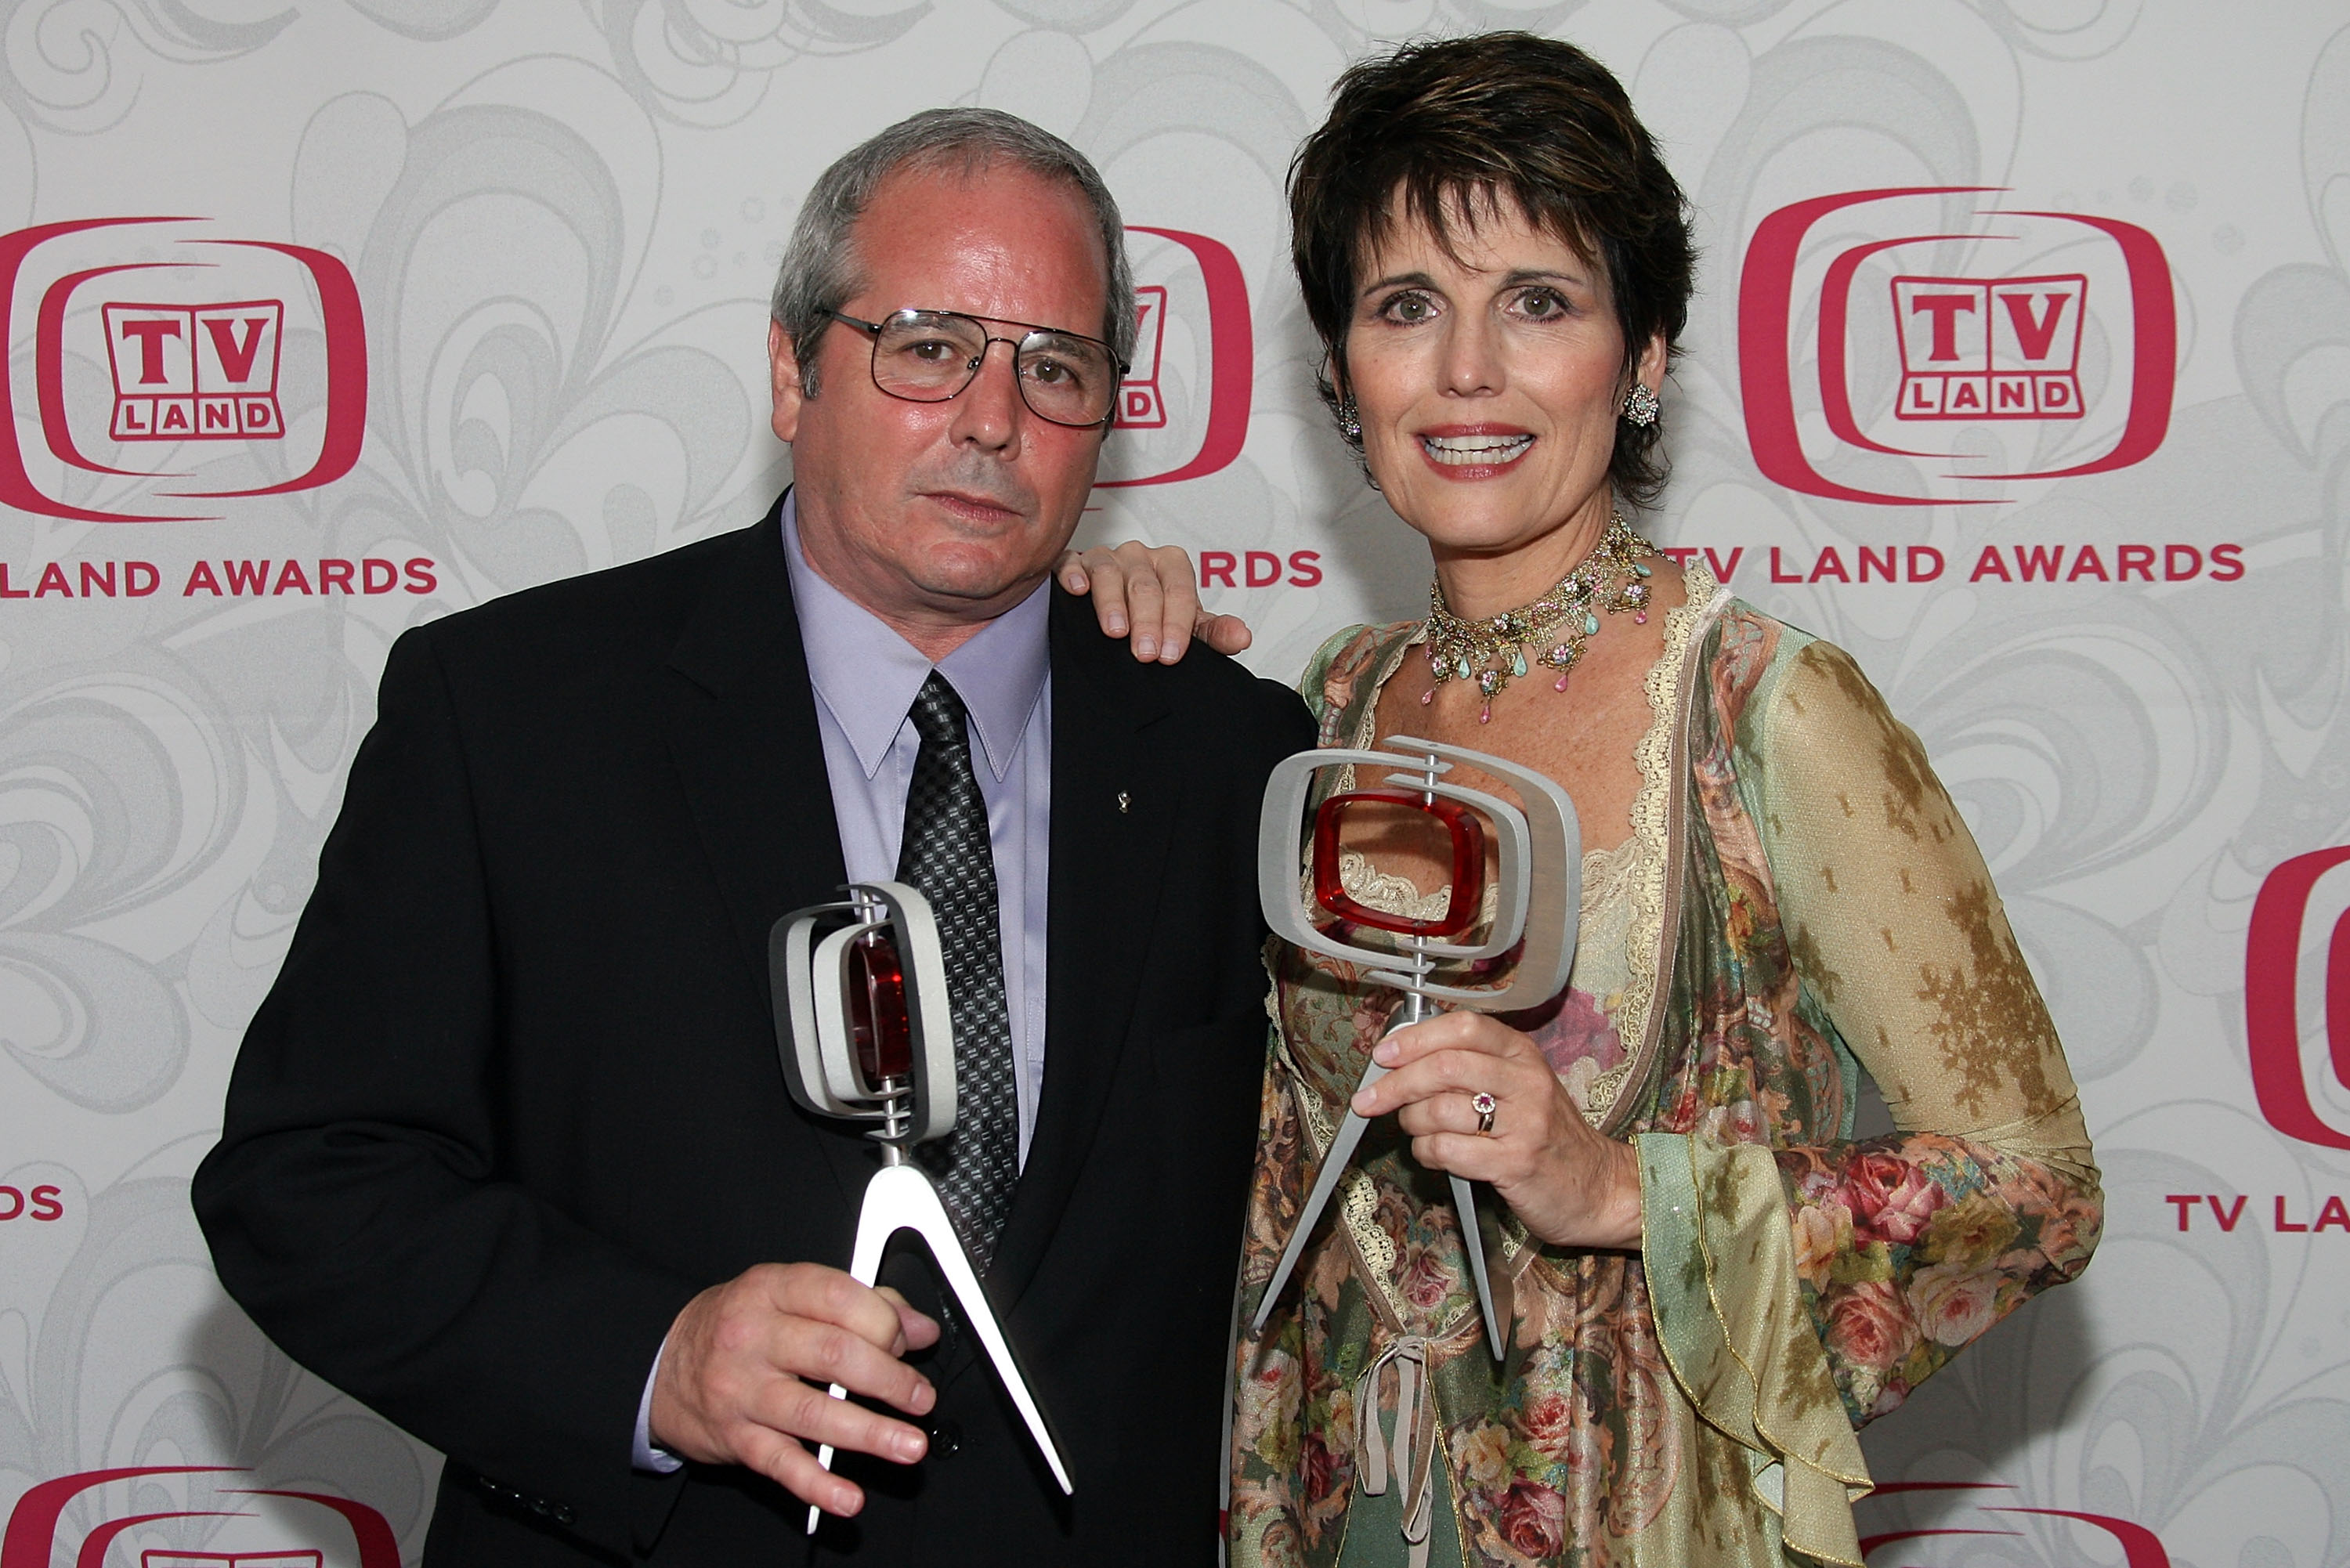 Desi Arnaz Jr. and Lucie Arnaz pose with the Legacy of Laughter Award for their mother, the late Lucille Ball backstage at the 5th Annual TV Land Awards held at Barker Hangar. on April 14, 2007. in Santa Monica, California. | Source: Getty Images